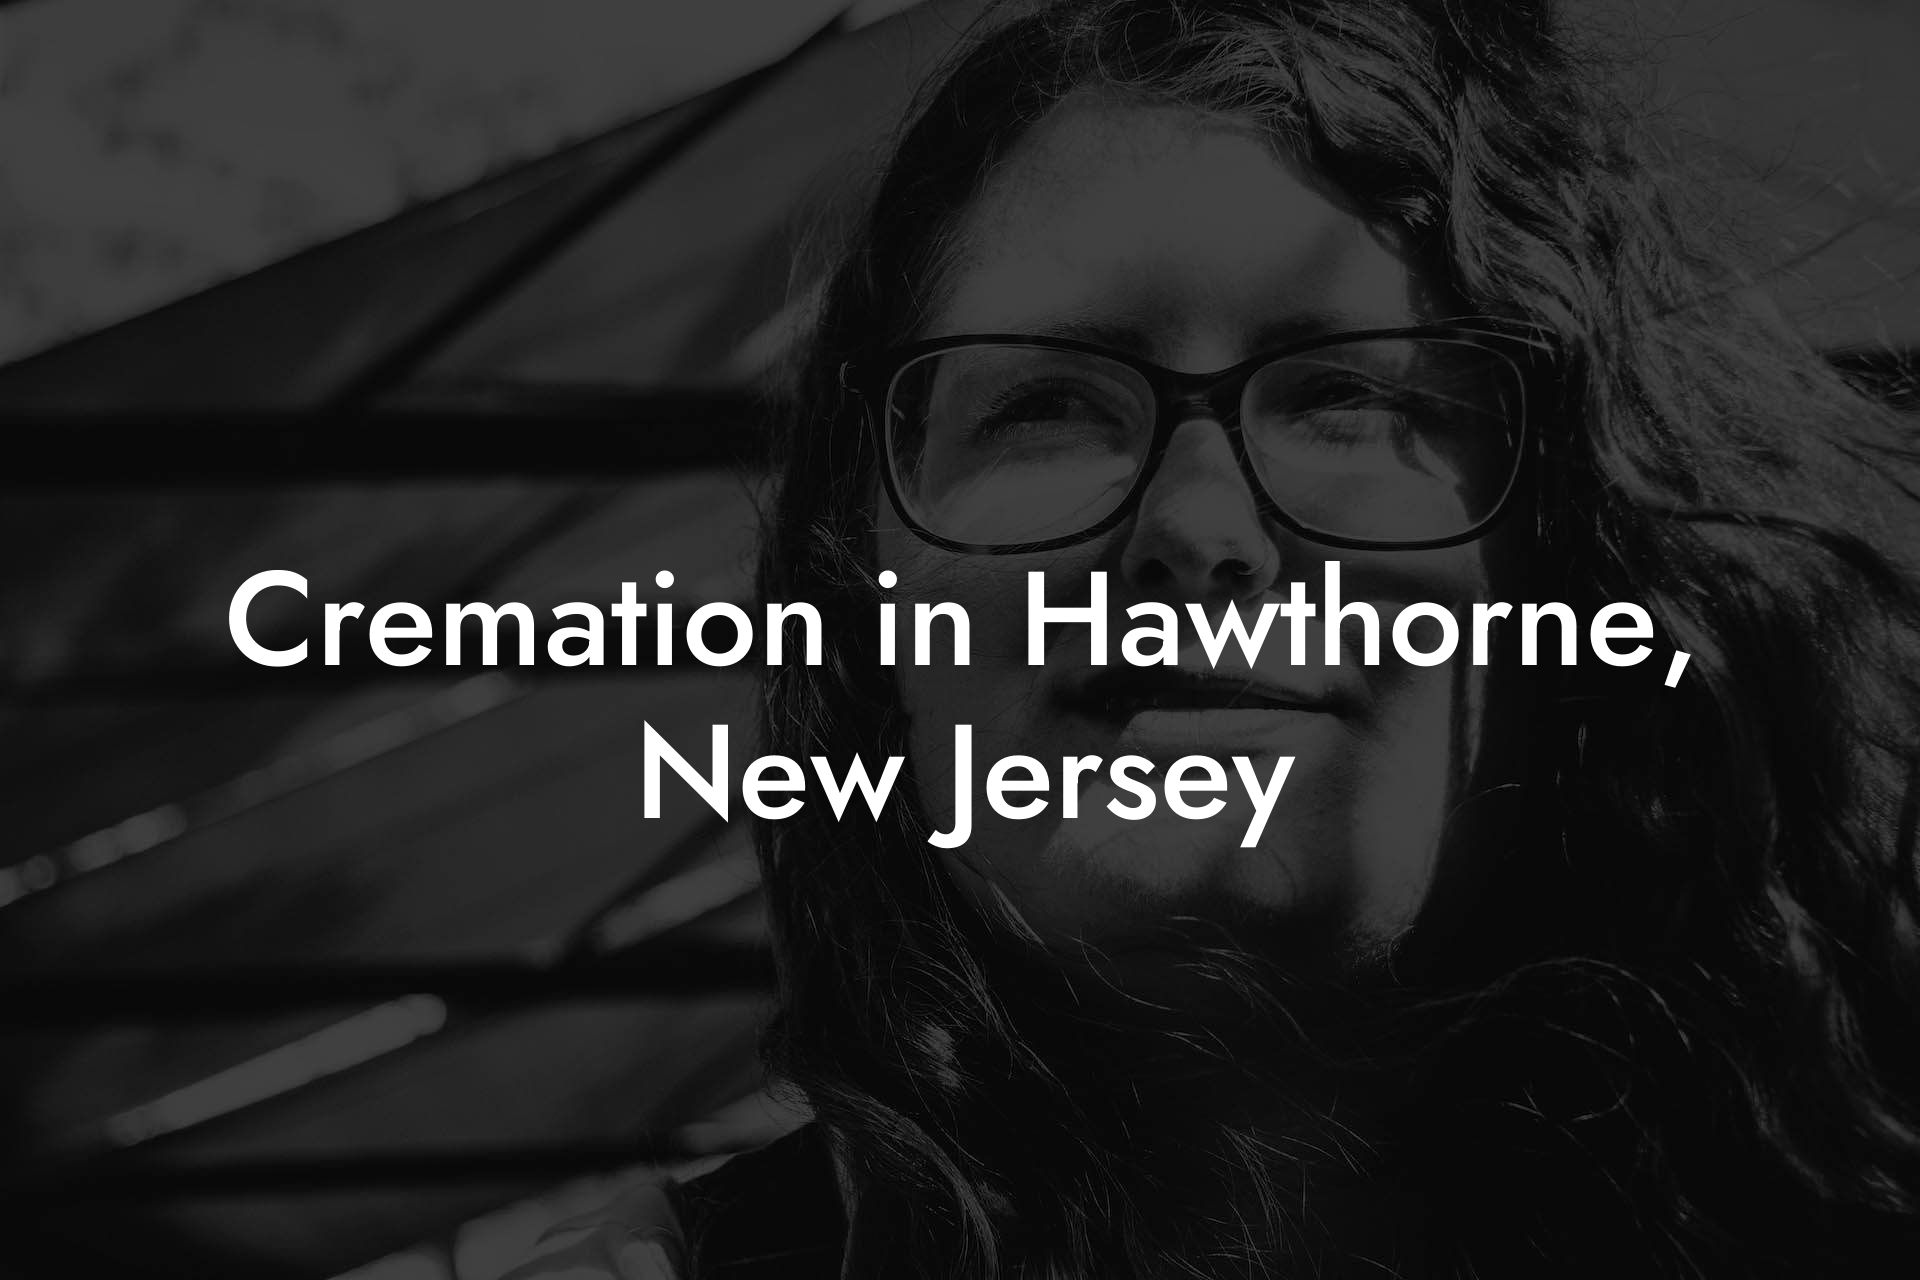 Cremation in Hawthorne, New Jersey